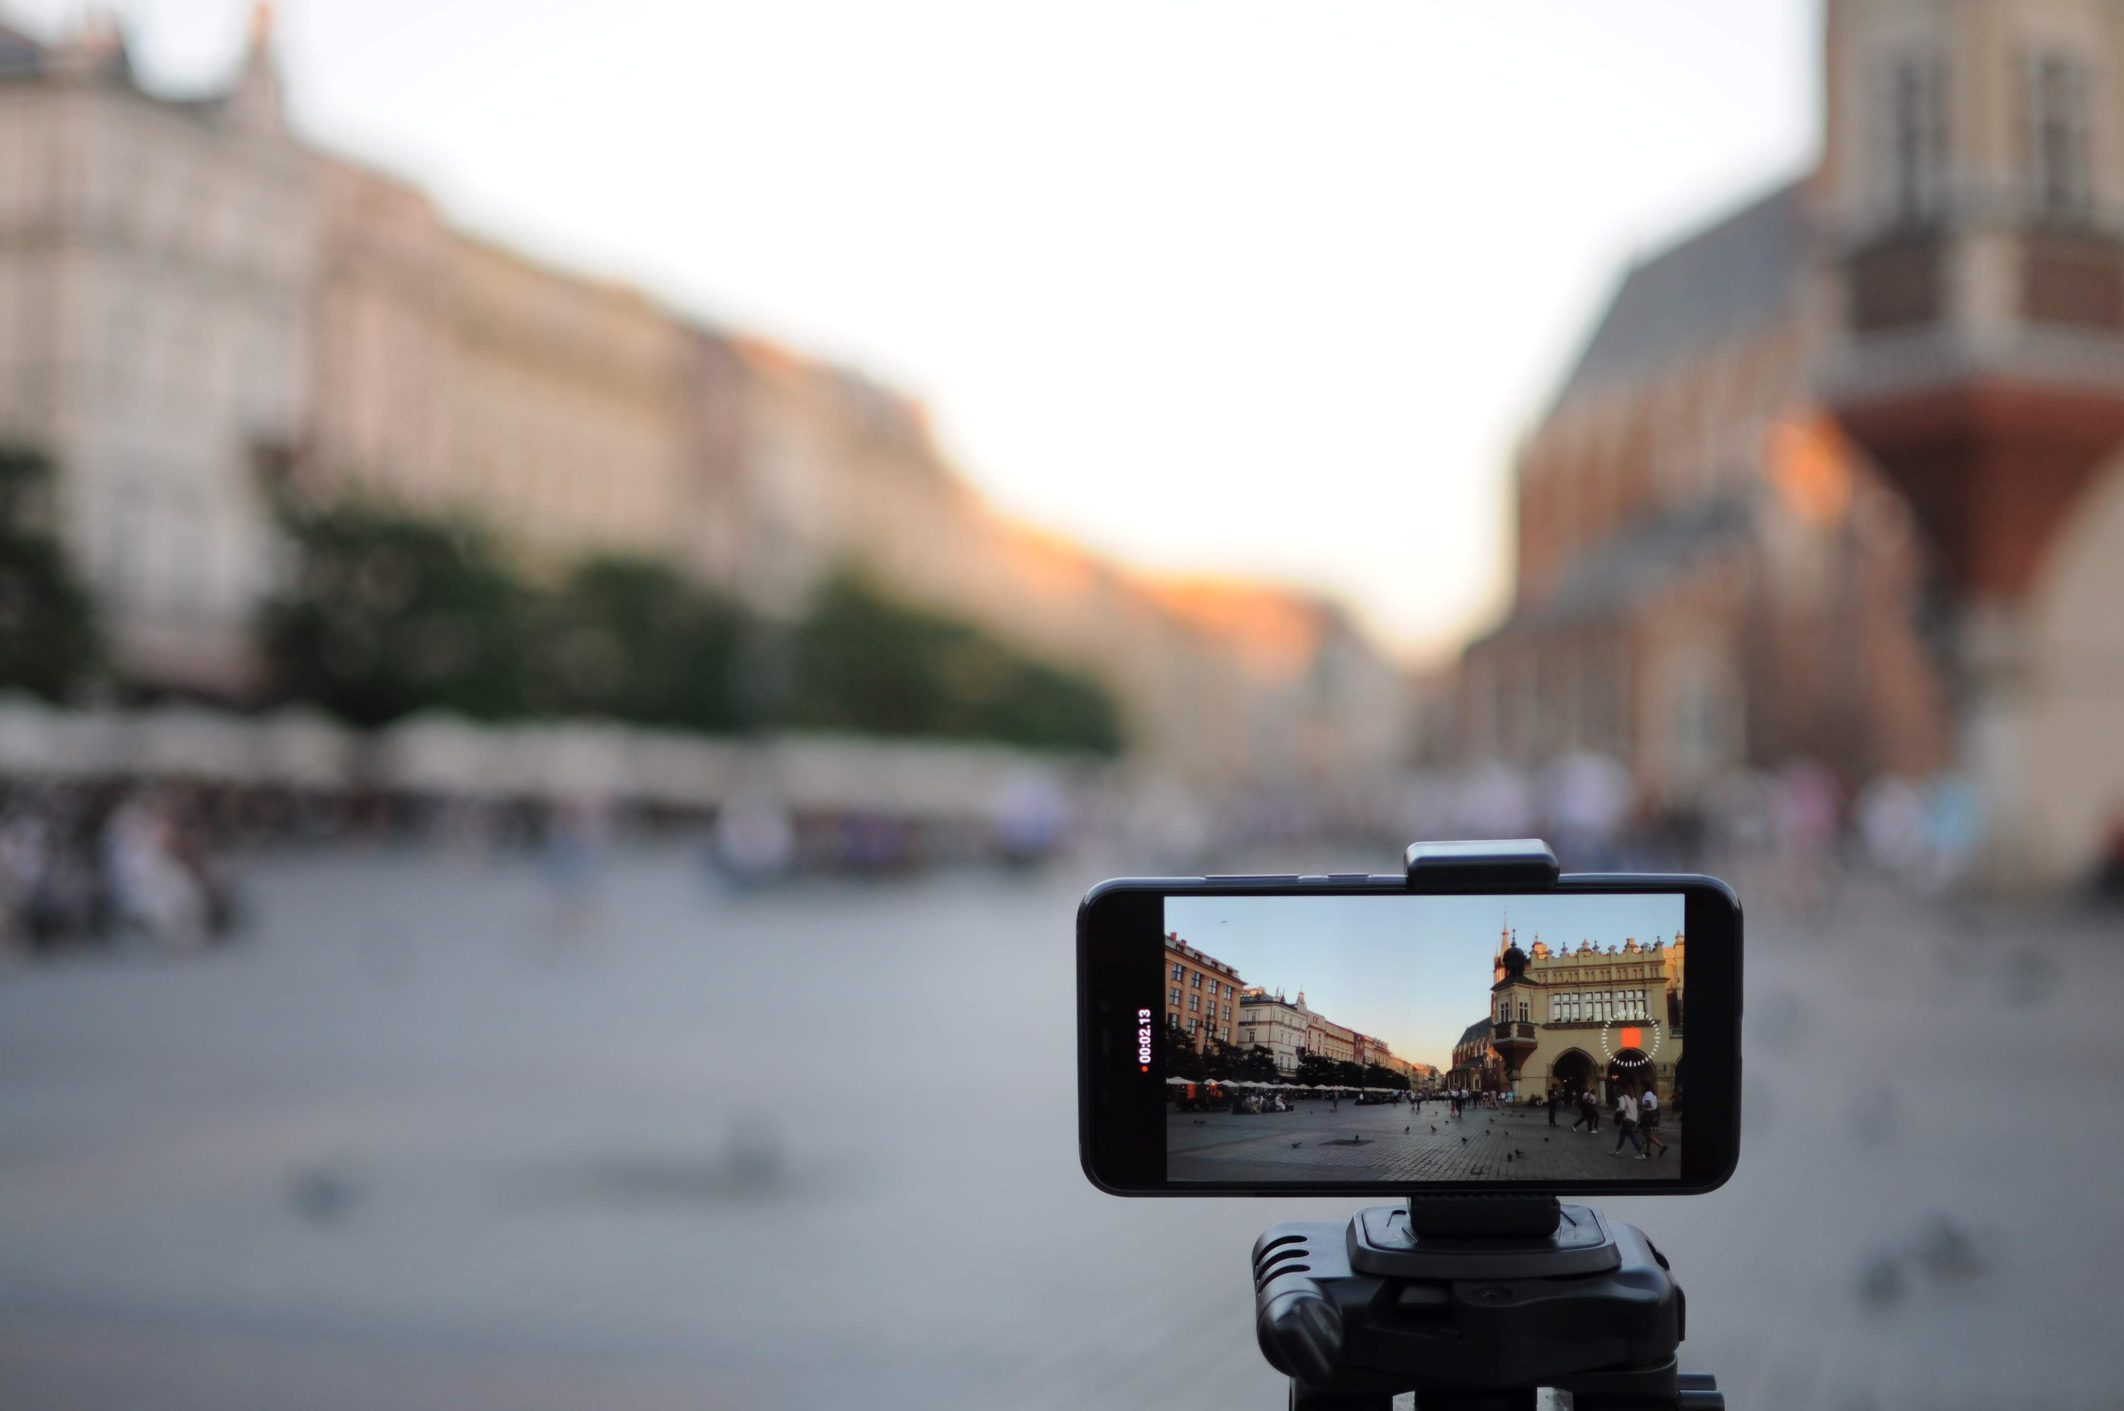 Close-up smartphone take cityscape photo and video timelapse on tripod.